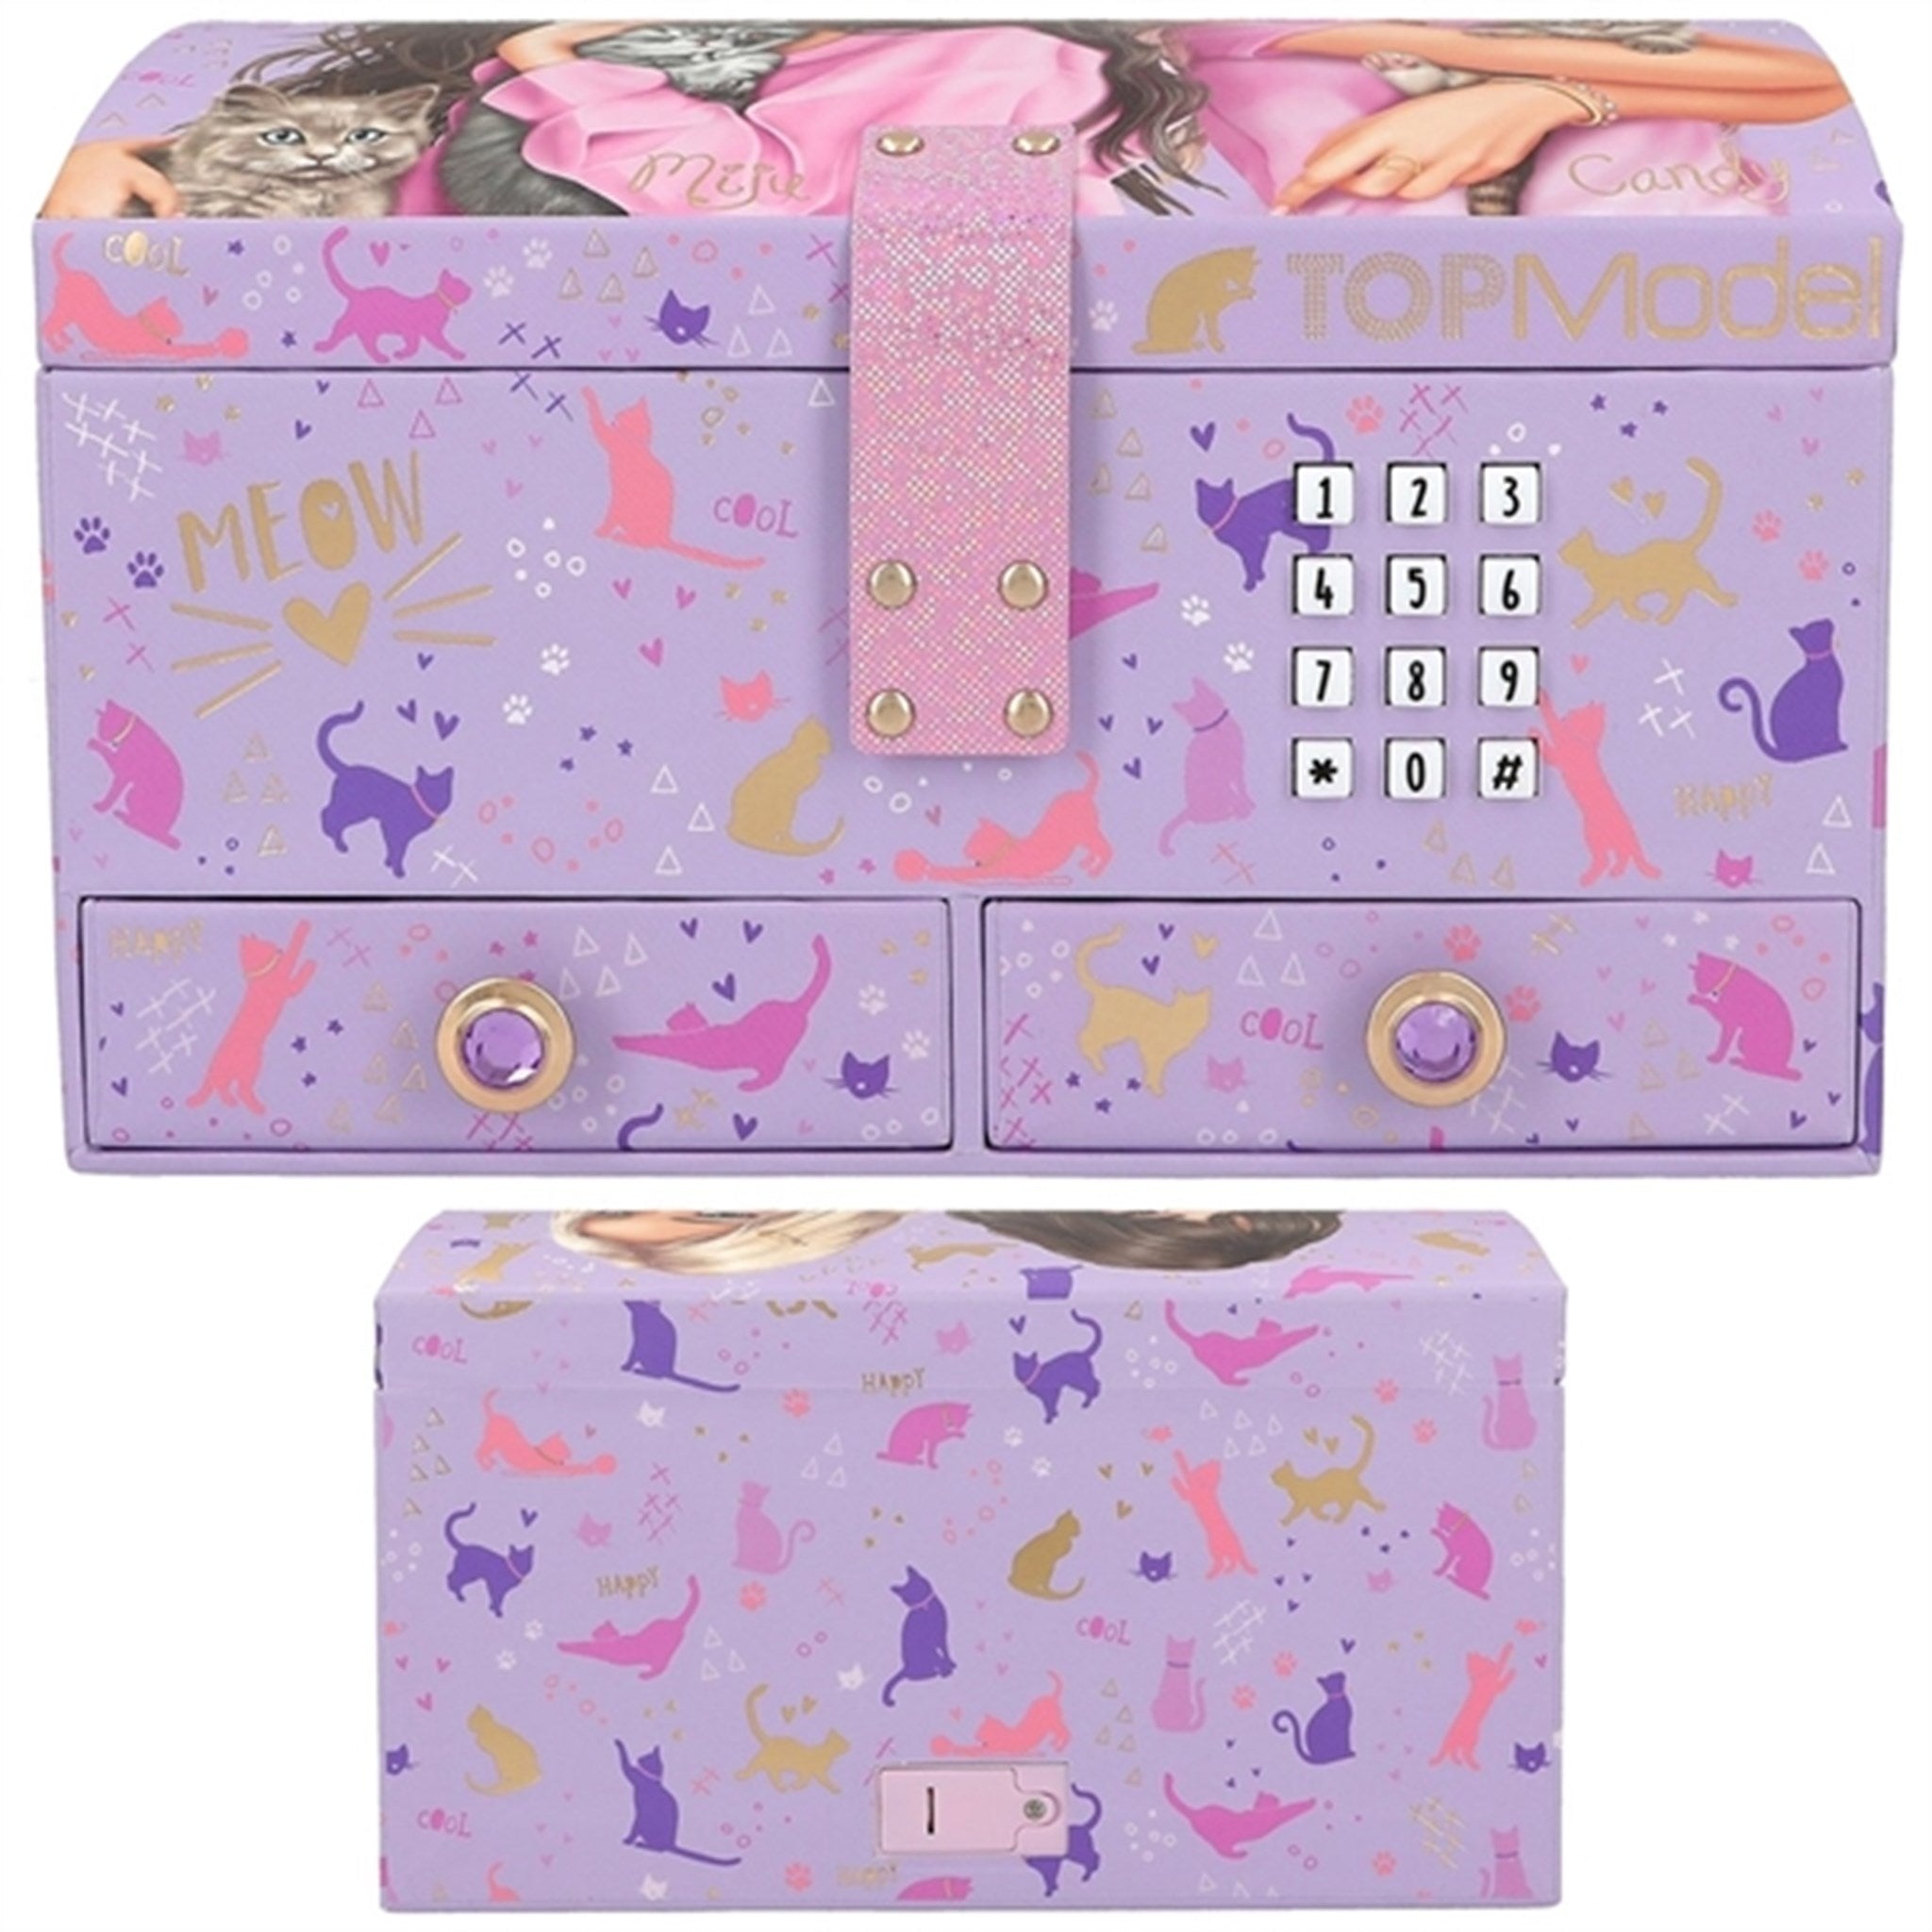 TOPModel Jewellery Box with Code and Music 4